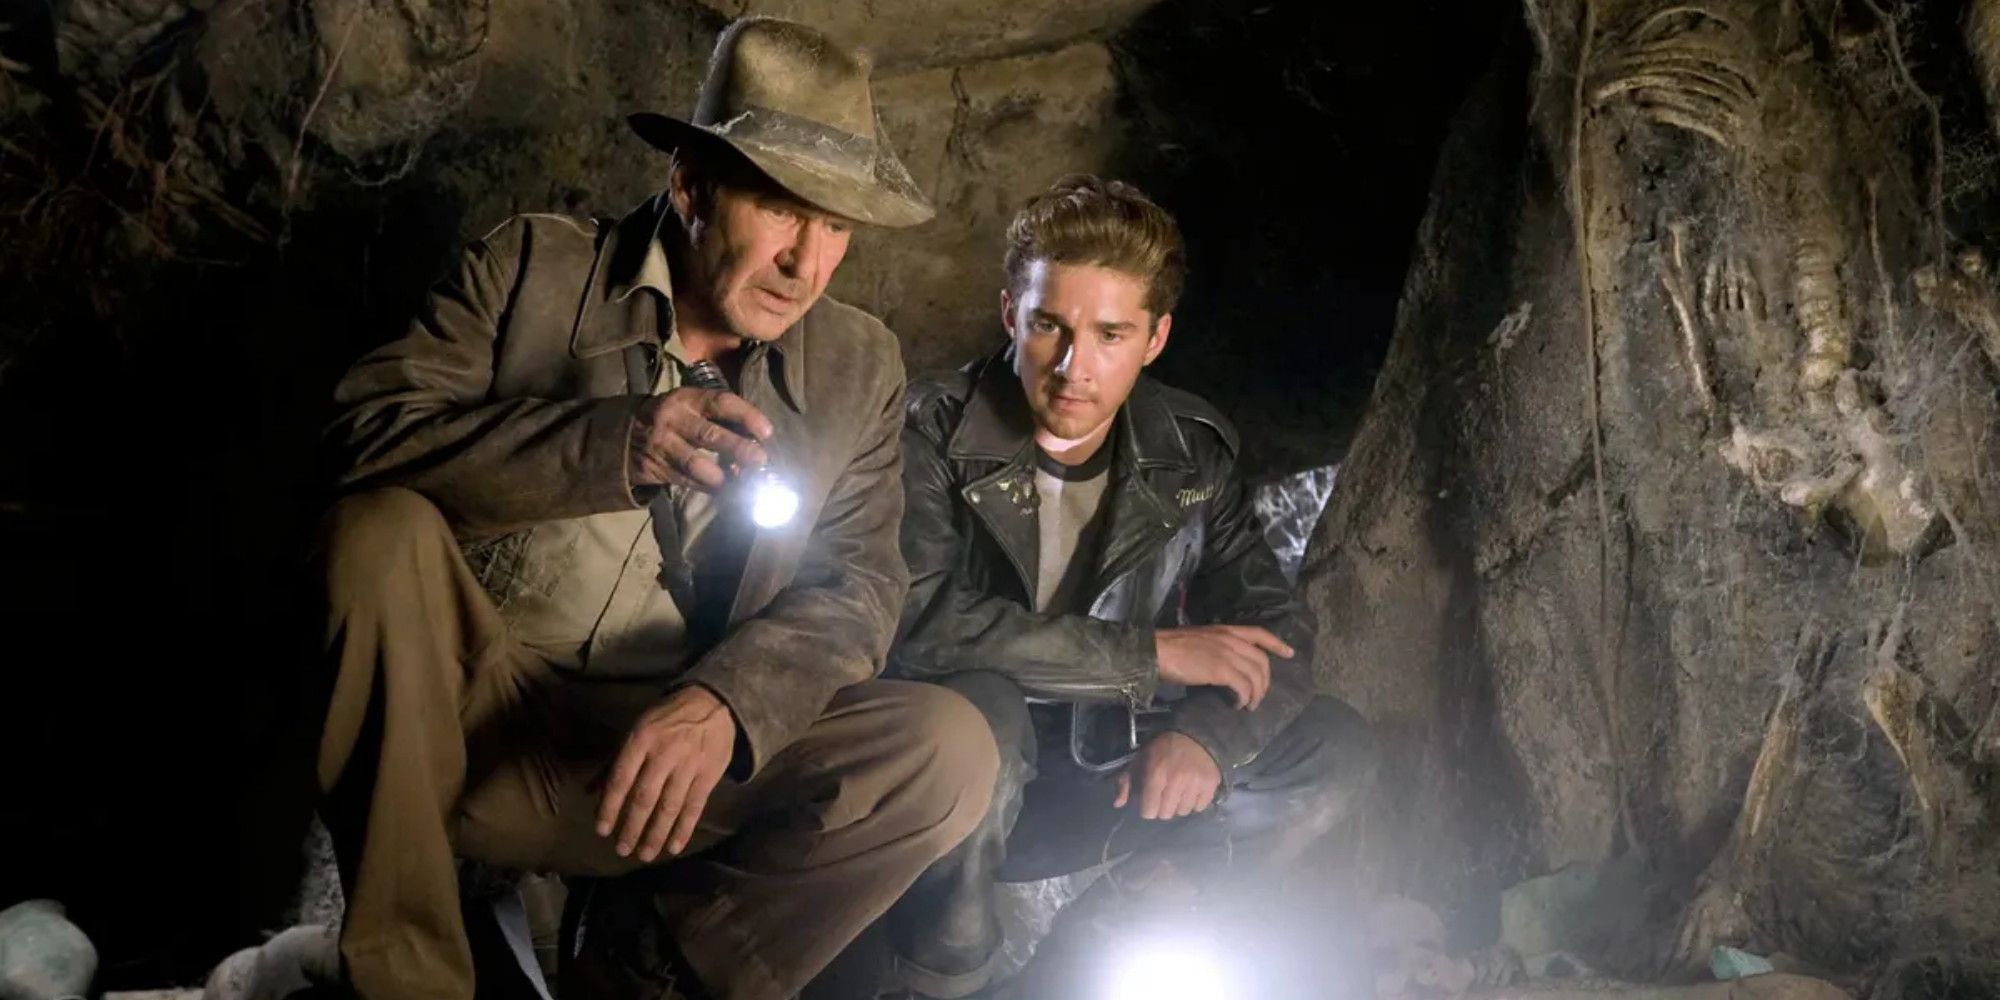 Harrison Ford and Shia LaBeouf Search for Clues in 'Indiana Jones and the Kingdom of the Sistal Skull'